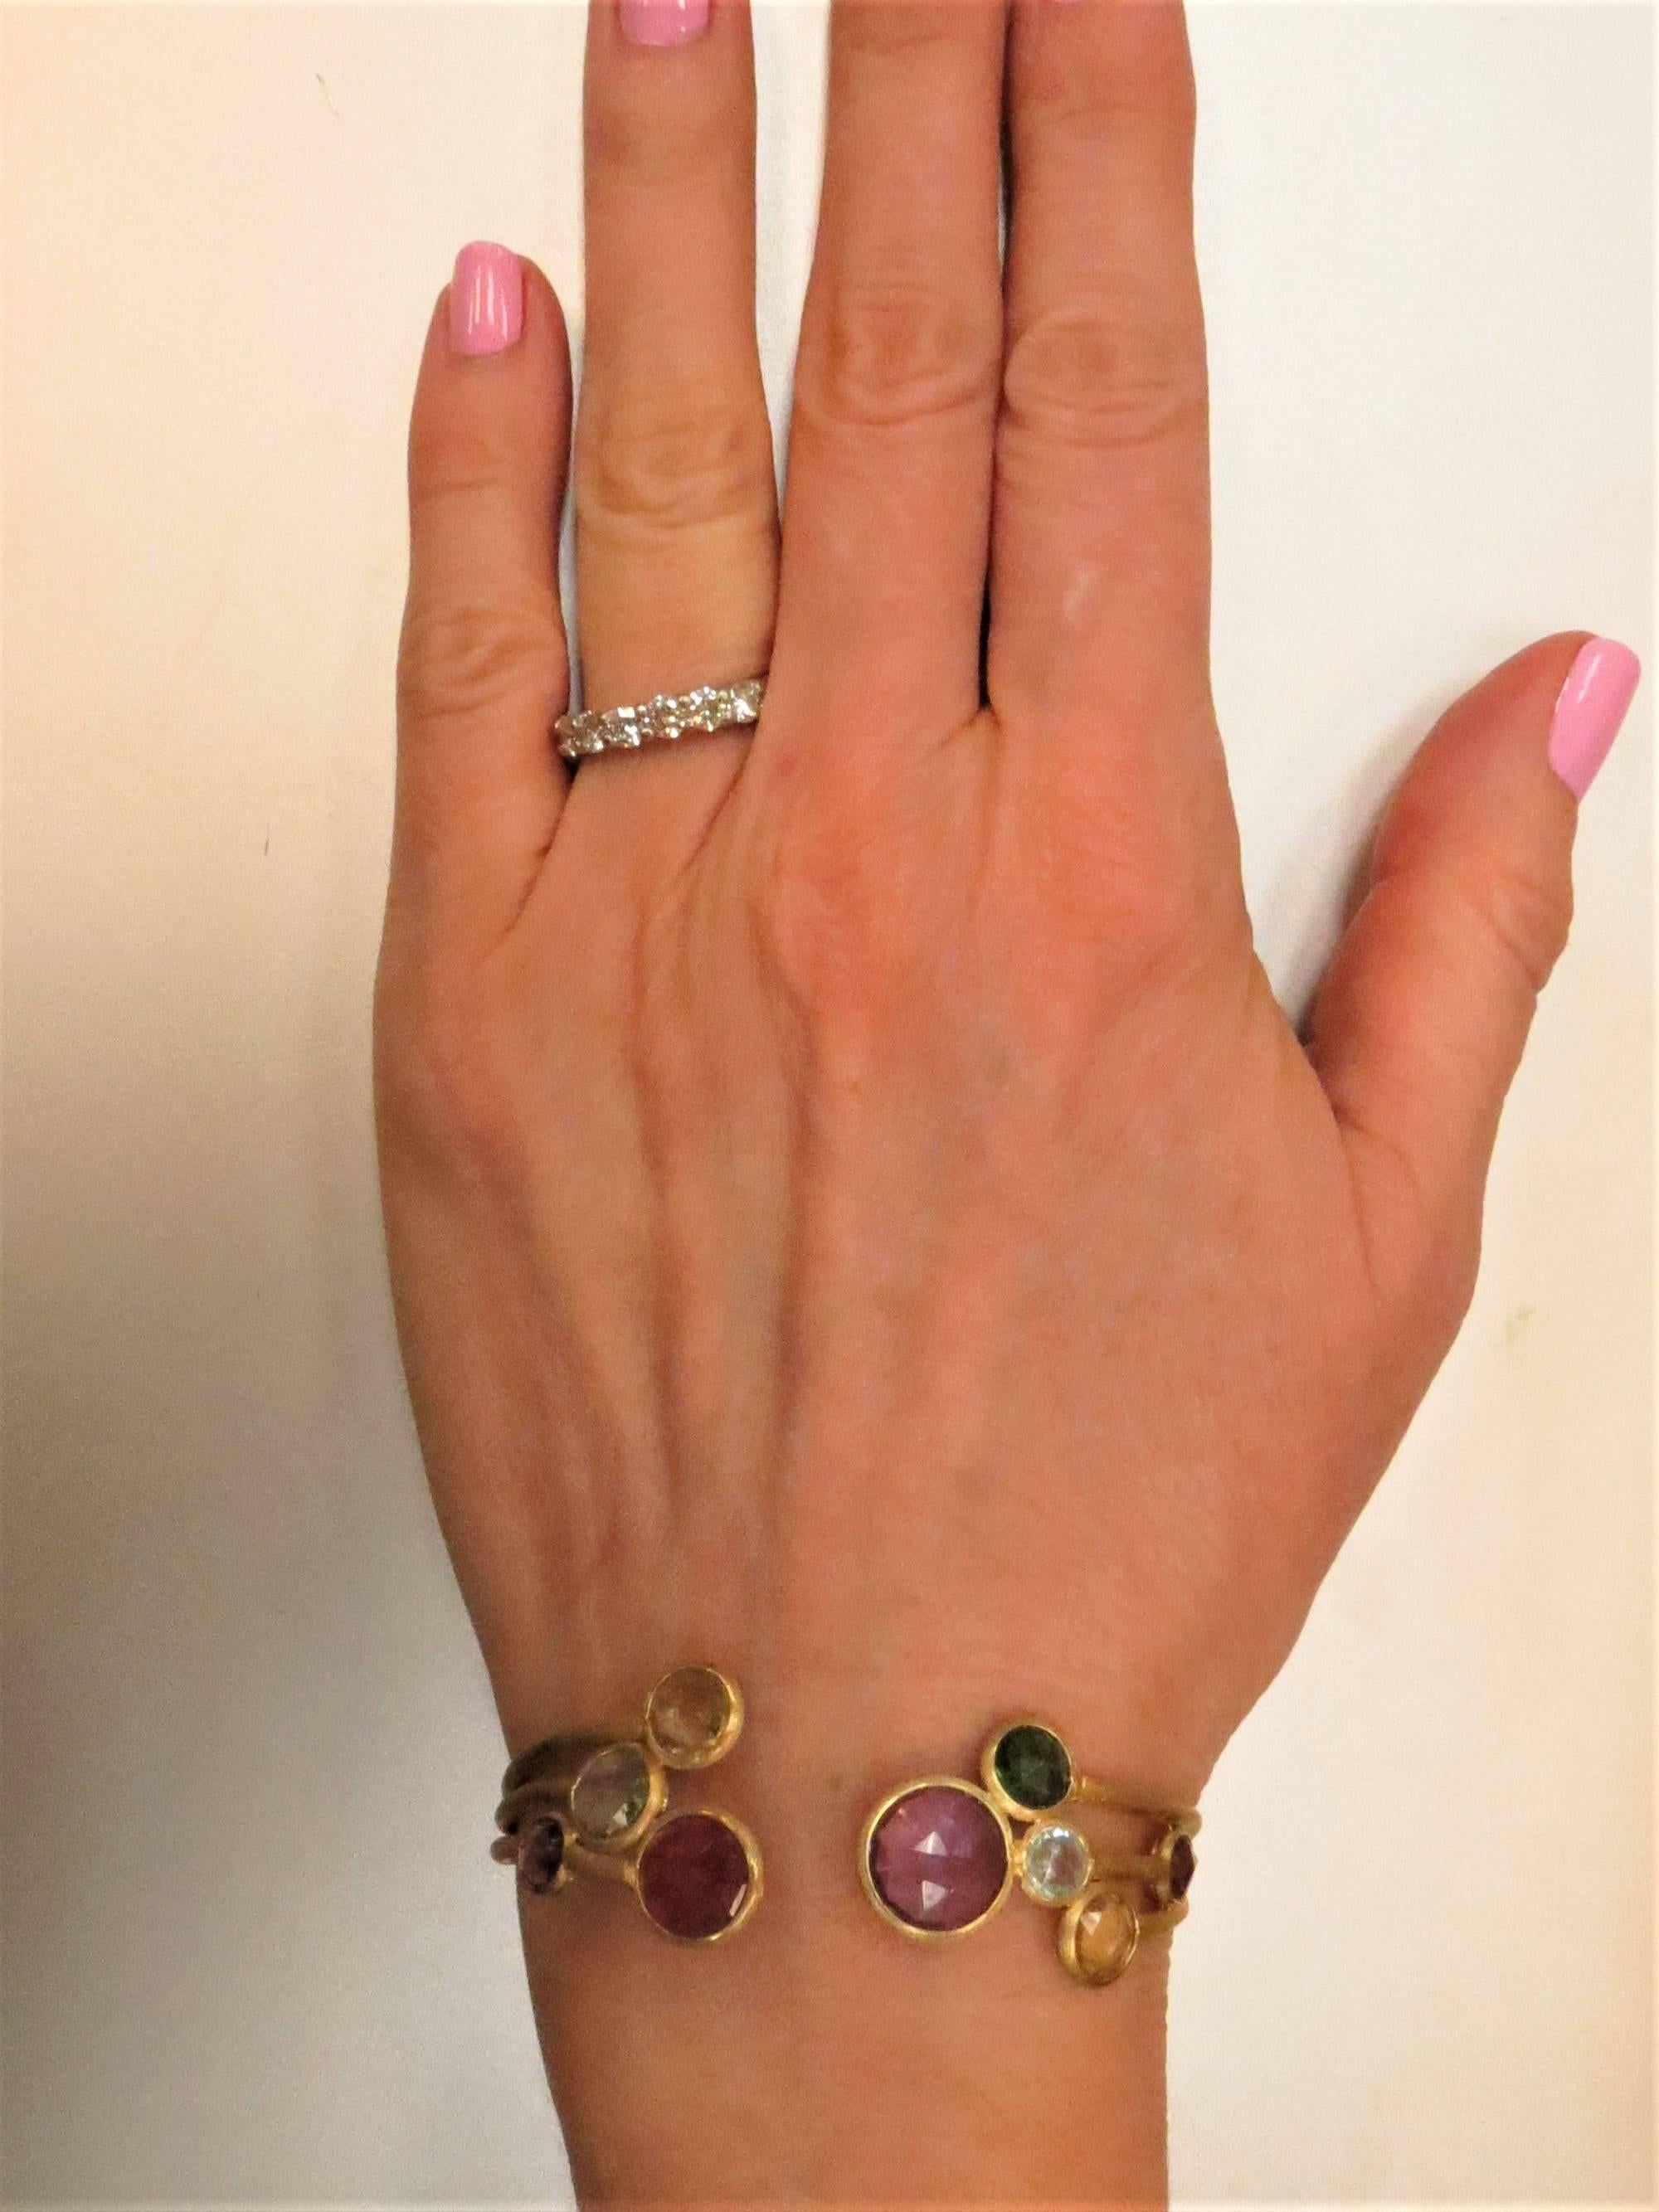 Marco Bicego, brand new, never worn, 18K yellow gold hinged bracelet bezel set with round faceted amethyst, blue topaz, tourmaline, and citrine.
Last retail $4000